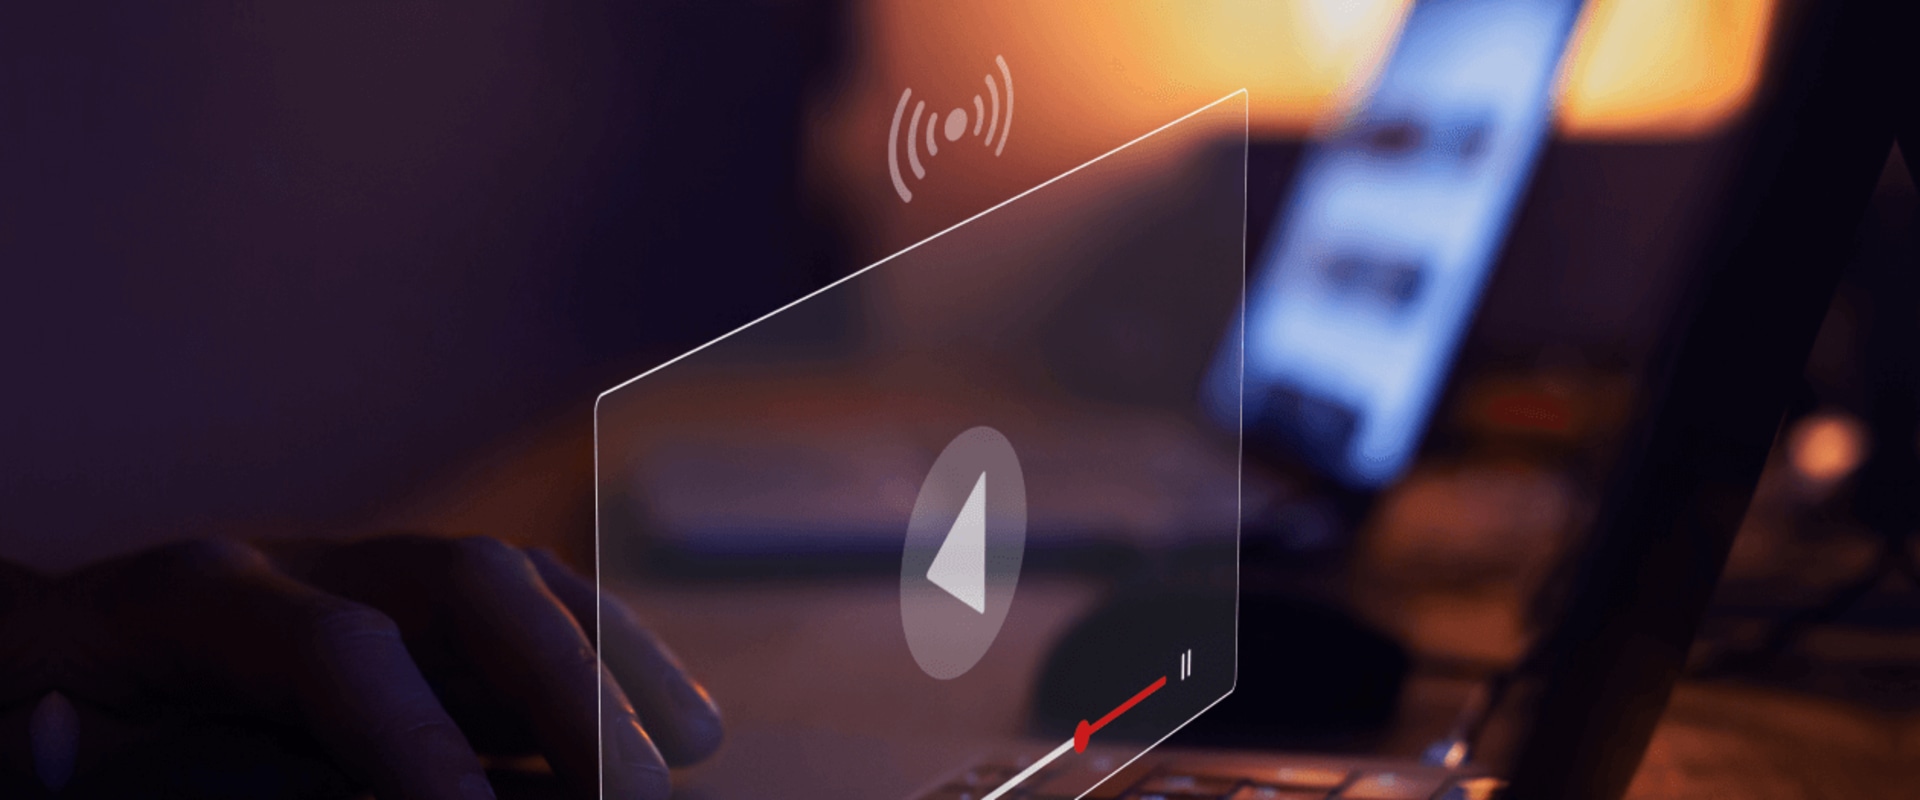 Top Rated Video Streaming Apps of 2023